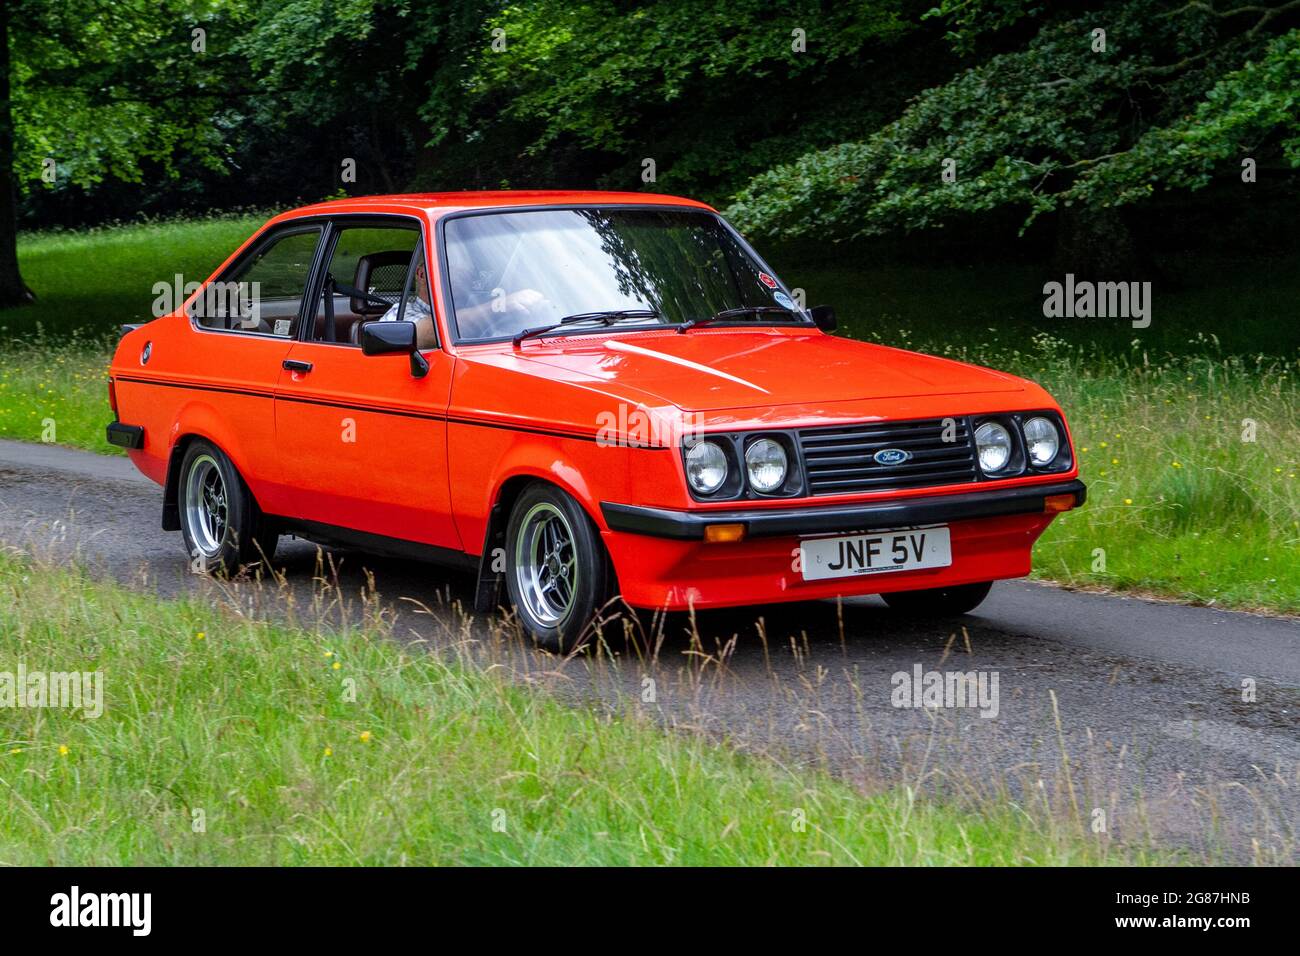 A Red Ford Escort Rs Custom Petrol at 'The Cars the Star Show” in Holker  Hall & Gardens, Grange-over-Sands, UK Stock Photo - Alamy